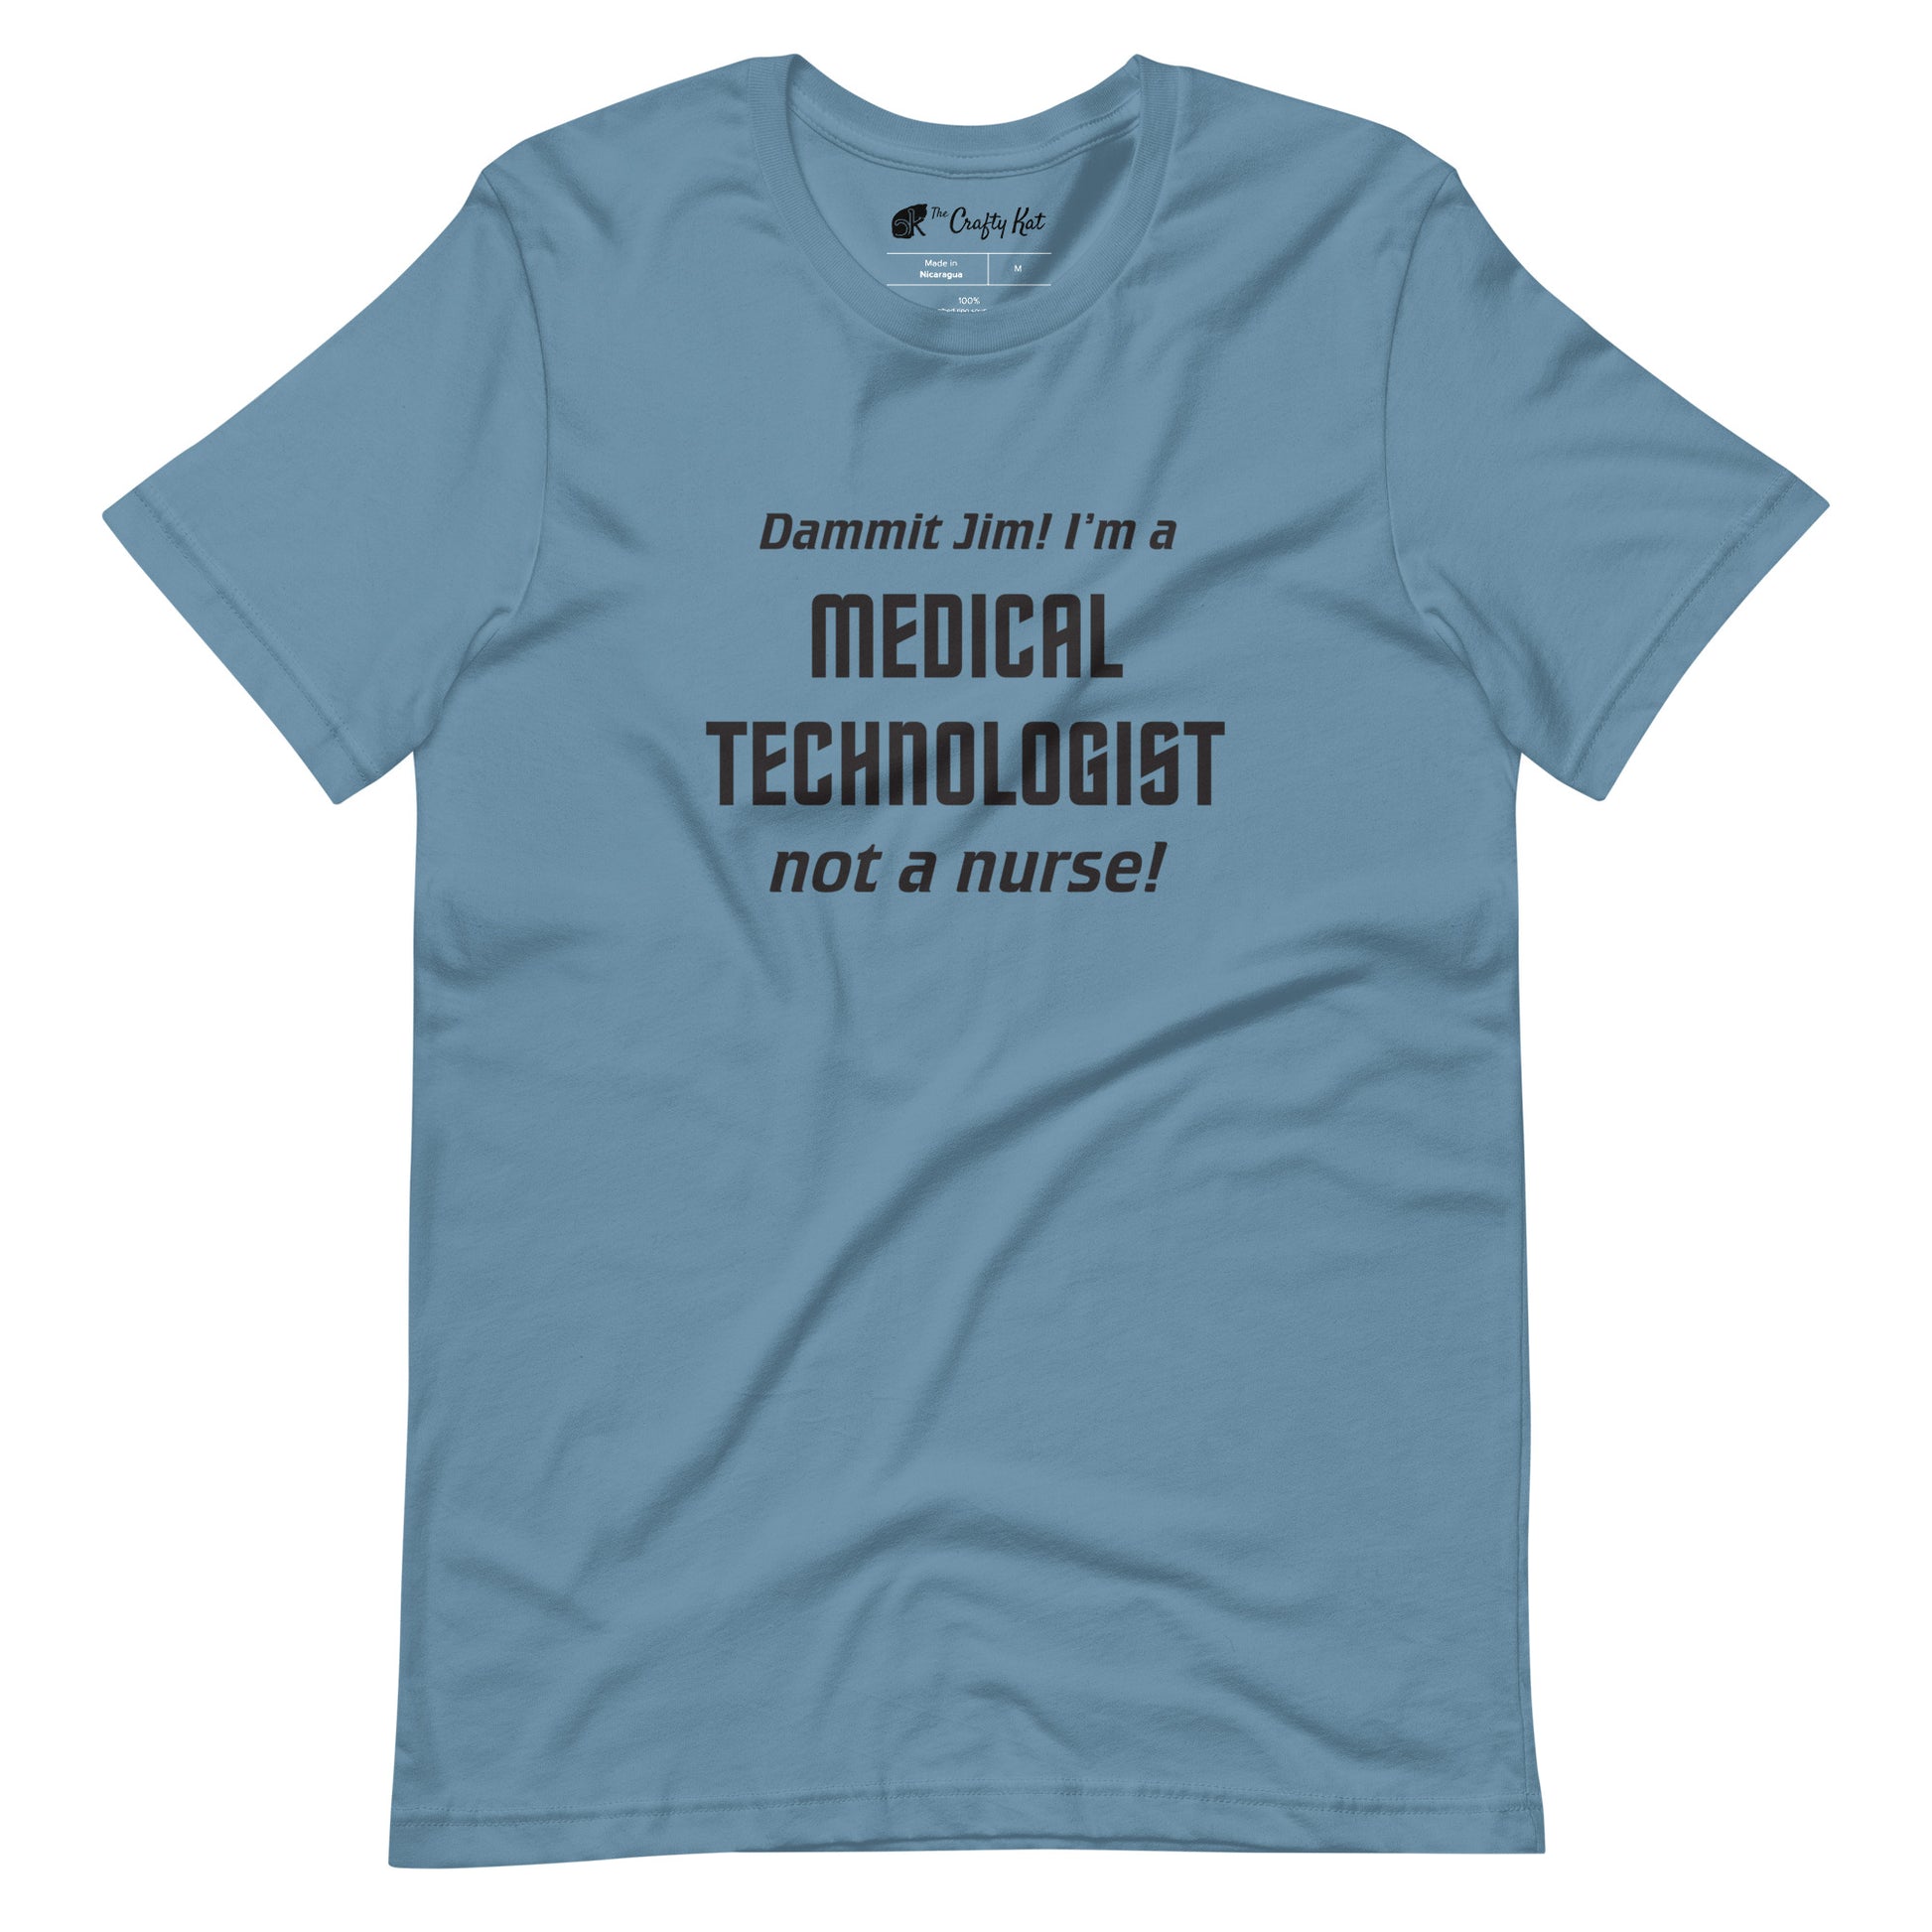 Steel Blue t-shirt with text graphic in Star Trek font: "Dammit Jim! I'm a MEDICAL TECHNOLOGIST not a nurse!"